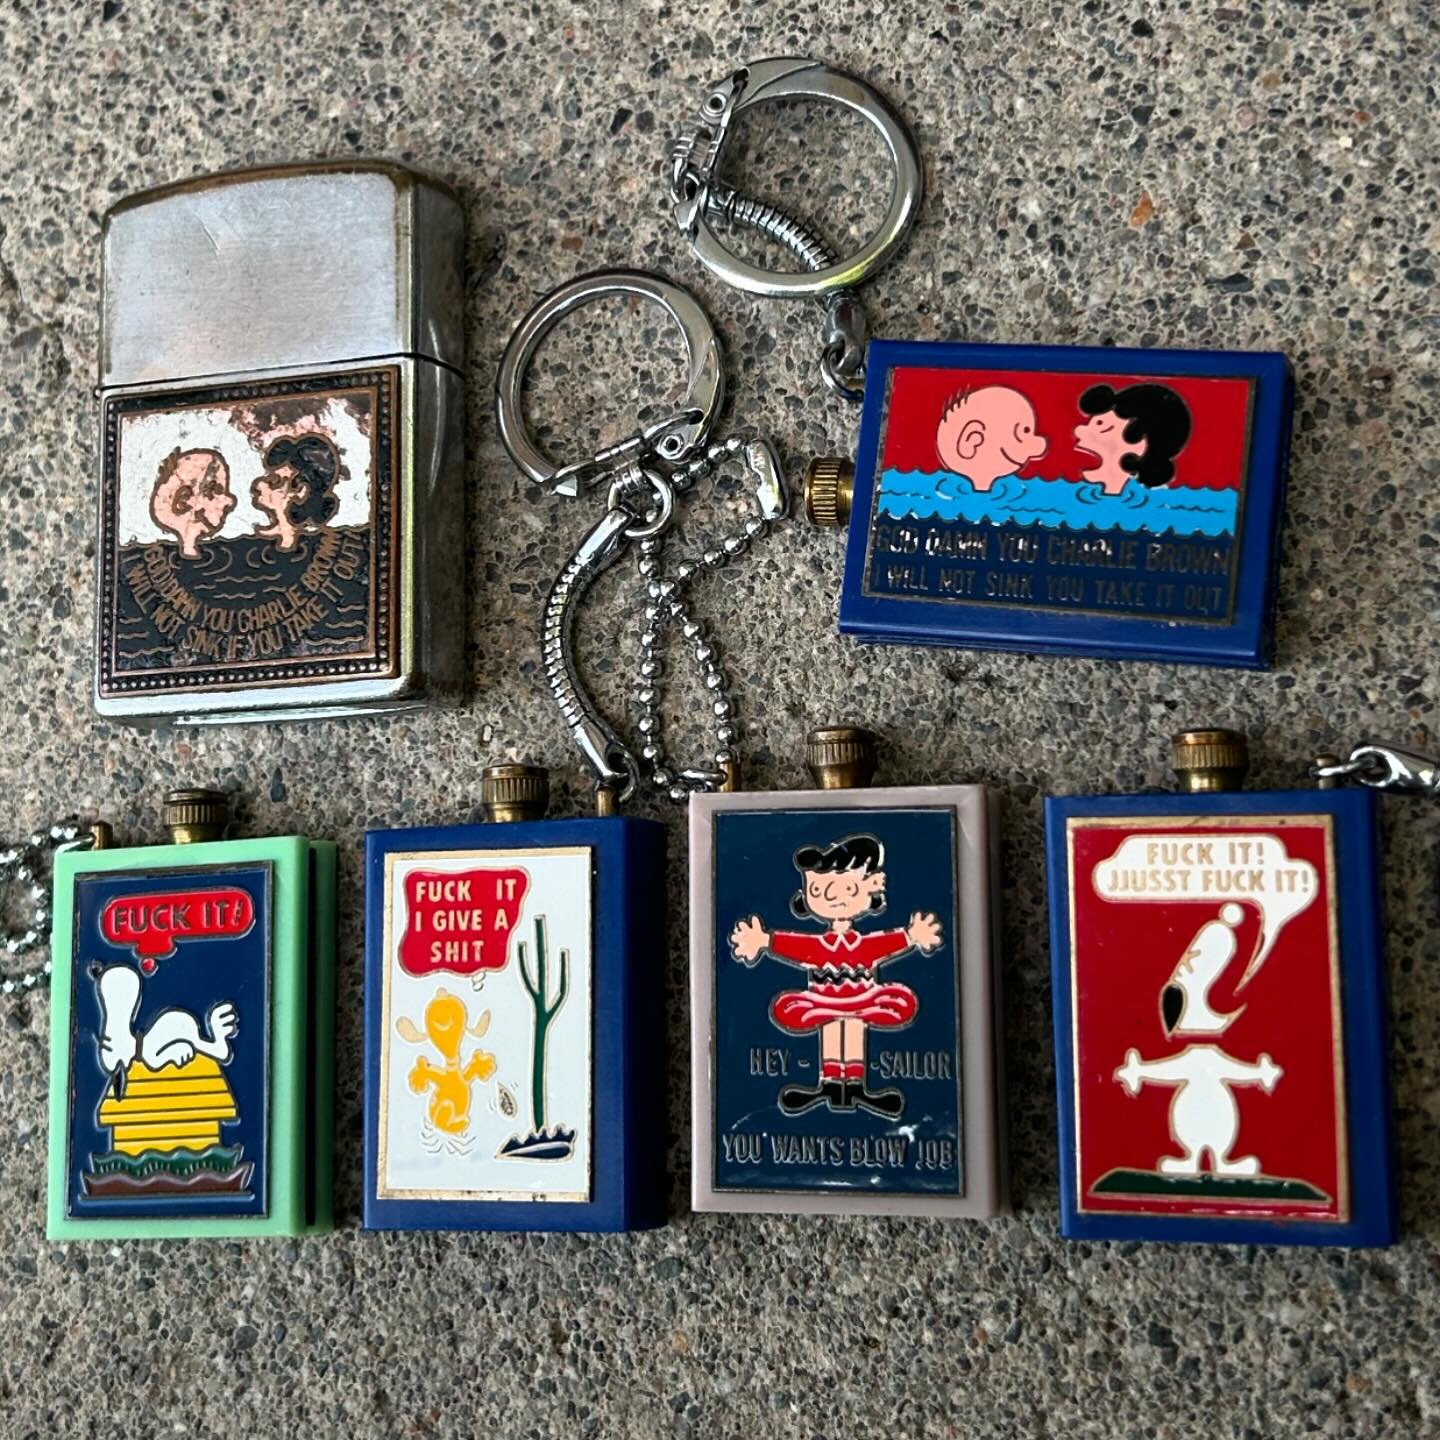 Rare Vietnam War era Peanuts spoof lighters.
Match lighter key chains and a flip top lighter.

DM for inquires 
Thanks for L👀King!